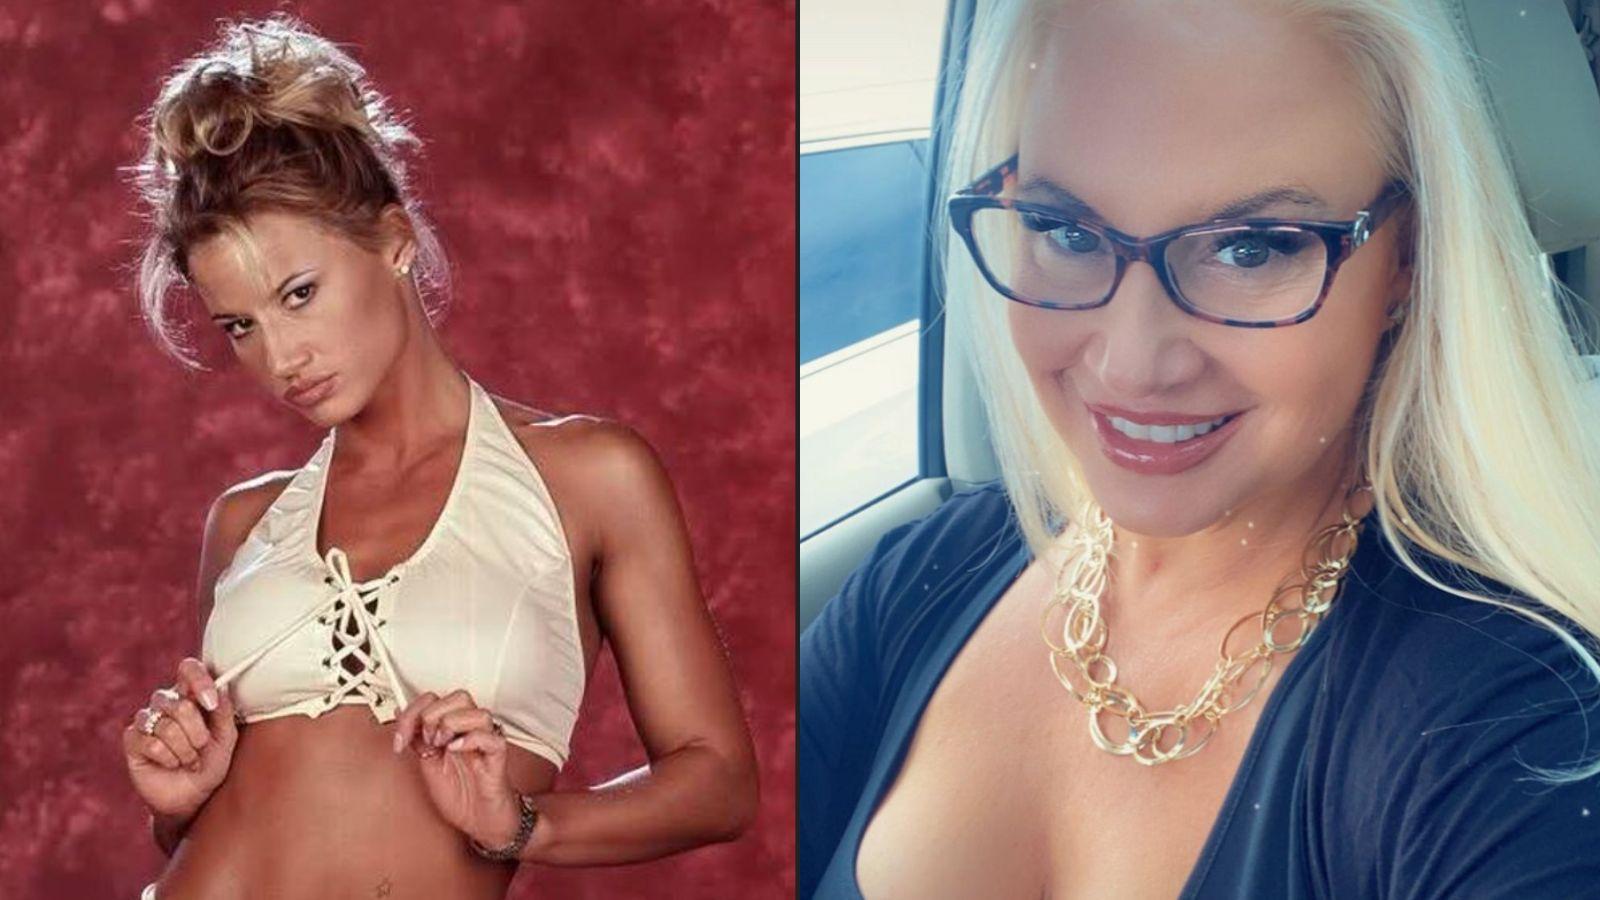 Tammy Lynn Sytch opened up about life in prison